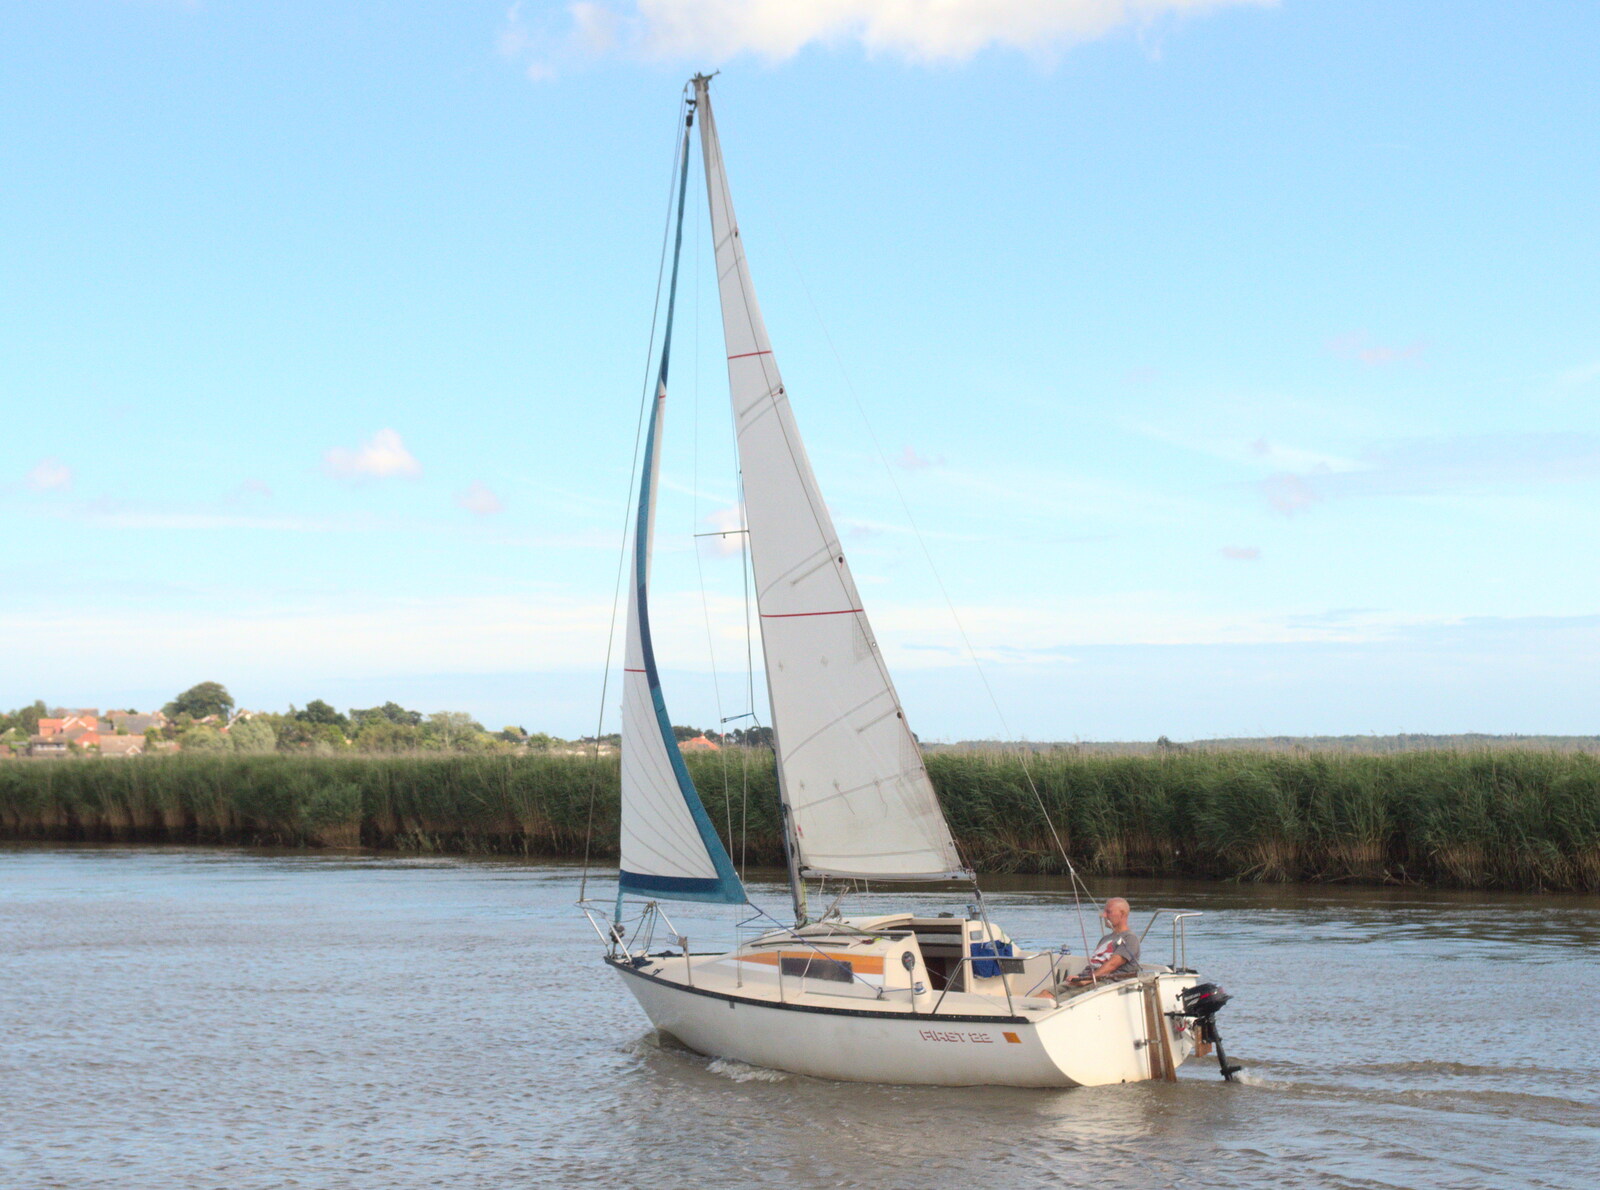 A yacht heads down wind from The Humpty Dumpty Beer Festival, Reedham, Norfolk - 22nd July 2017